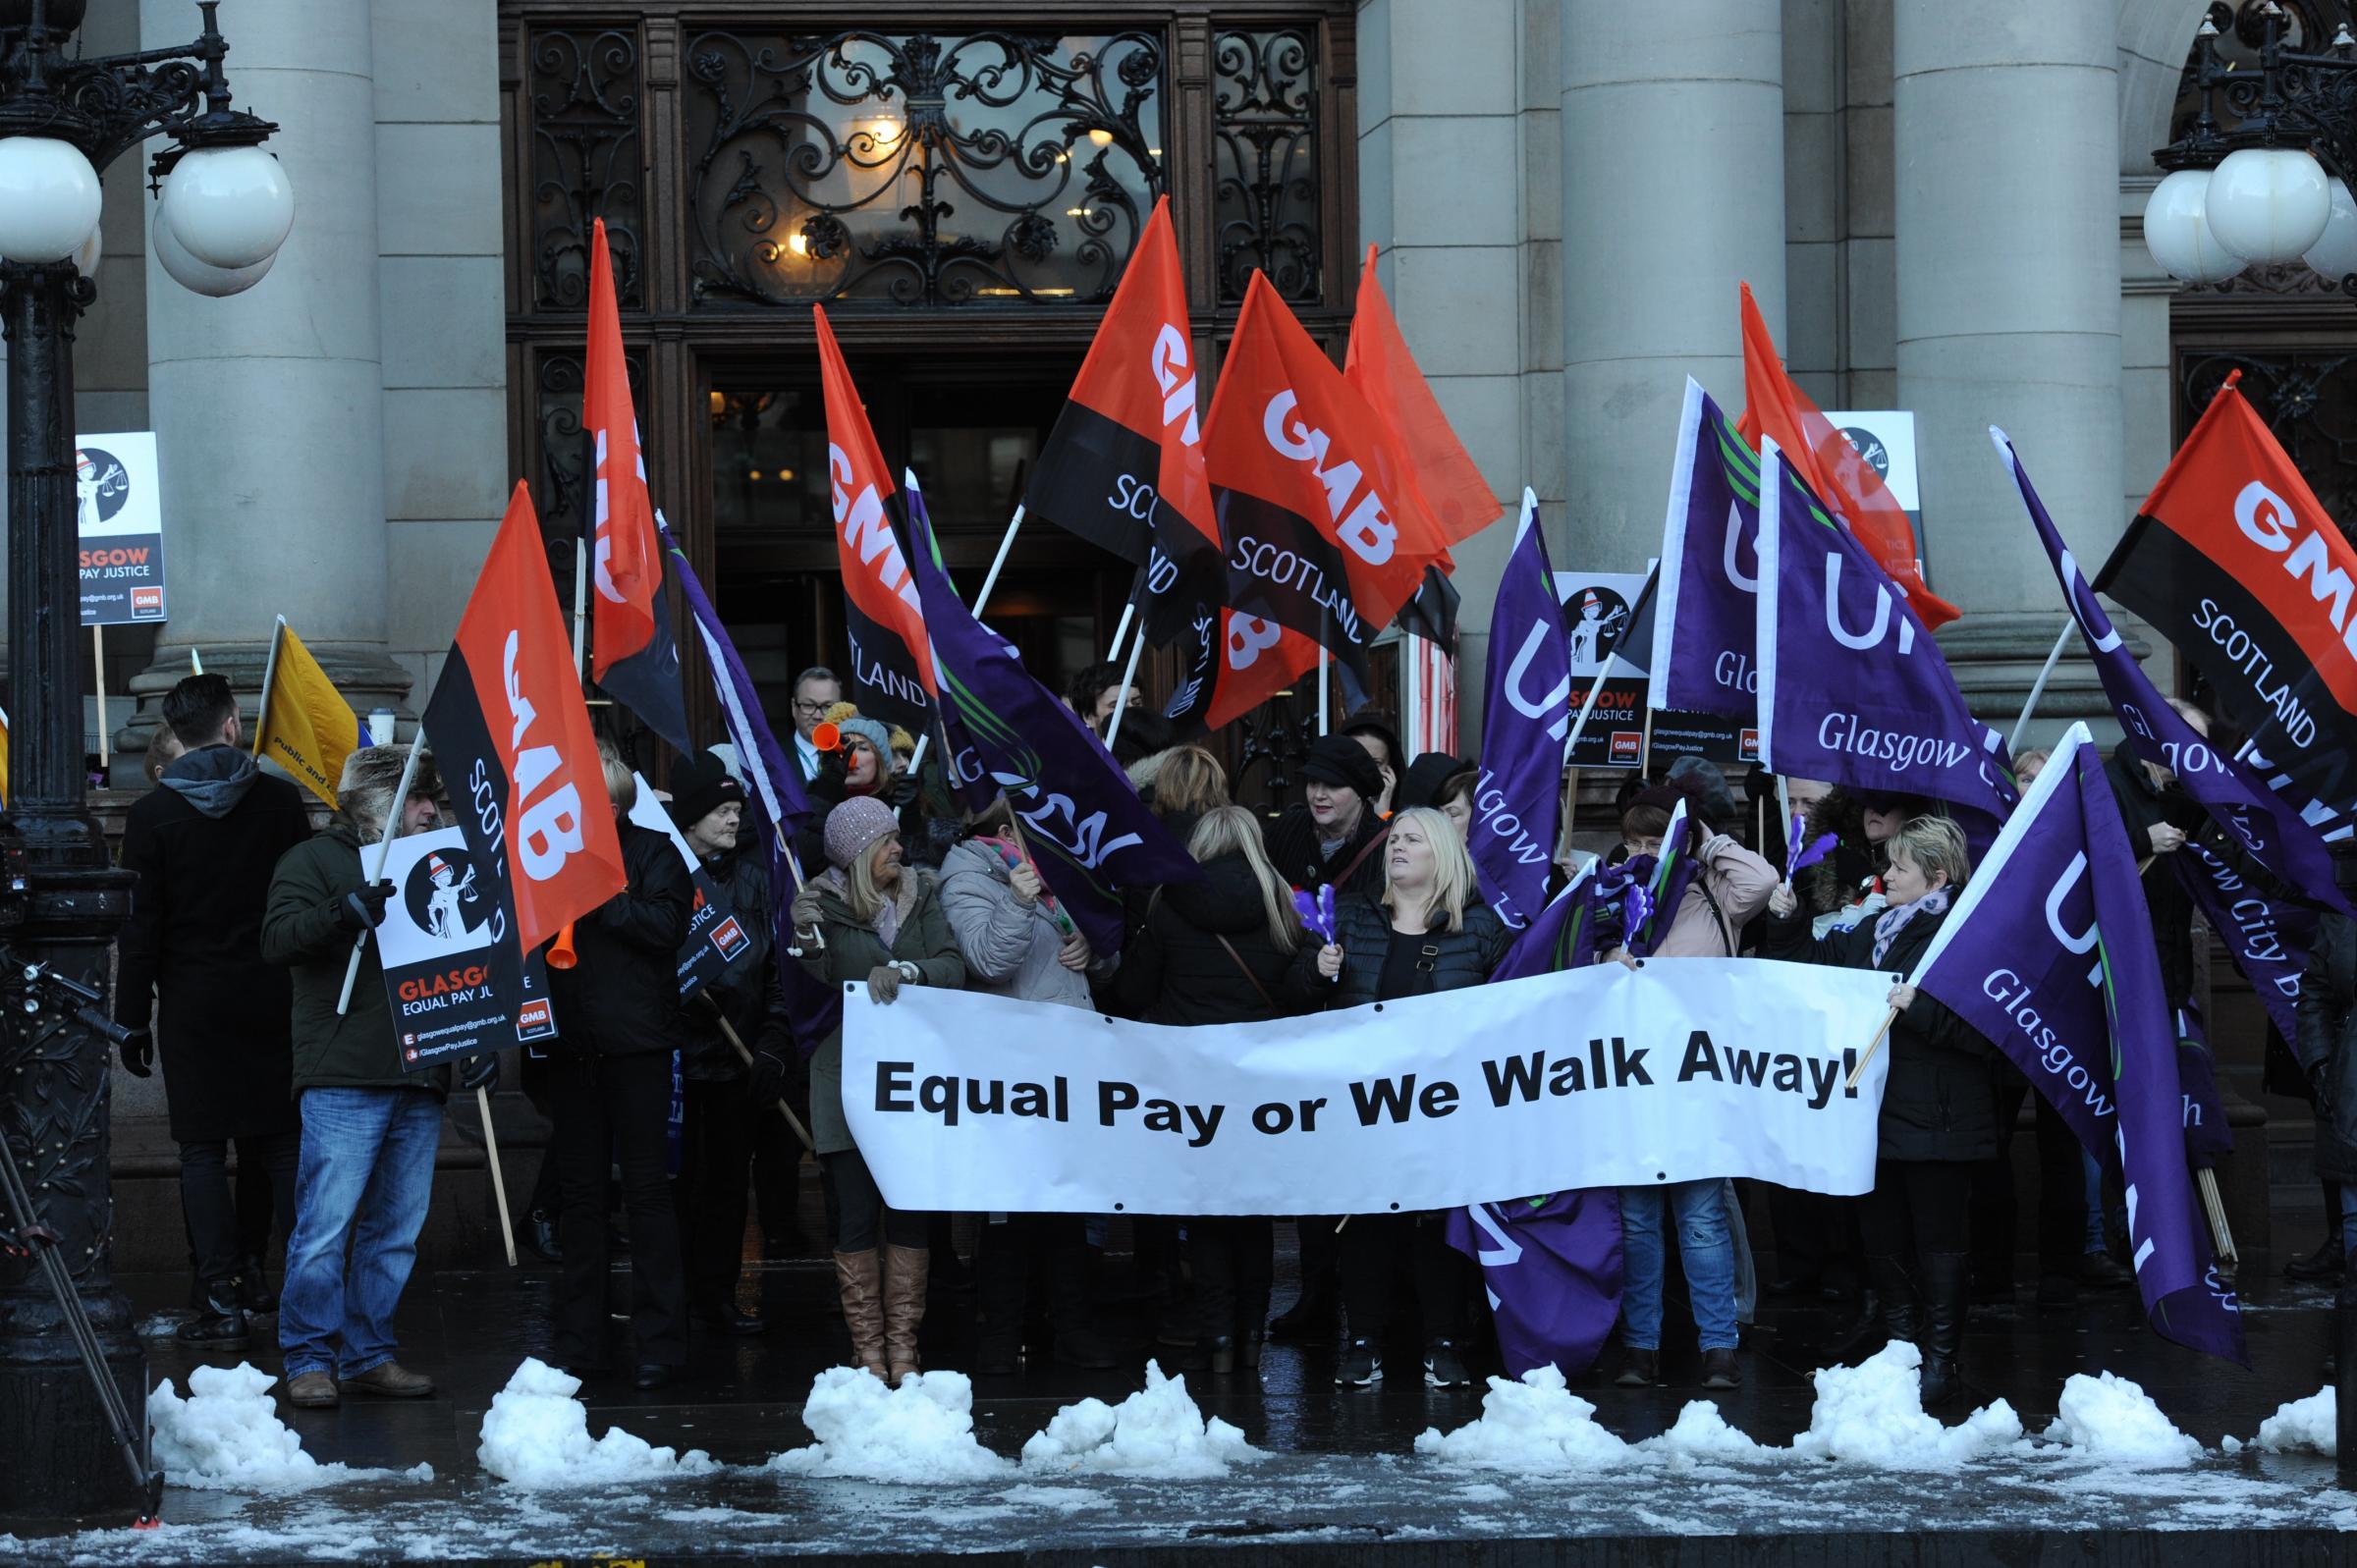 Equal pay strikes were held in 2018